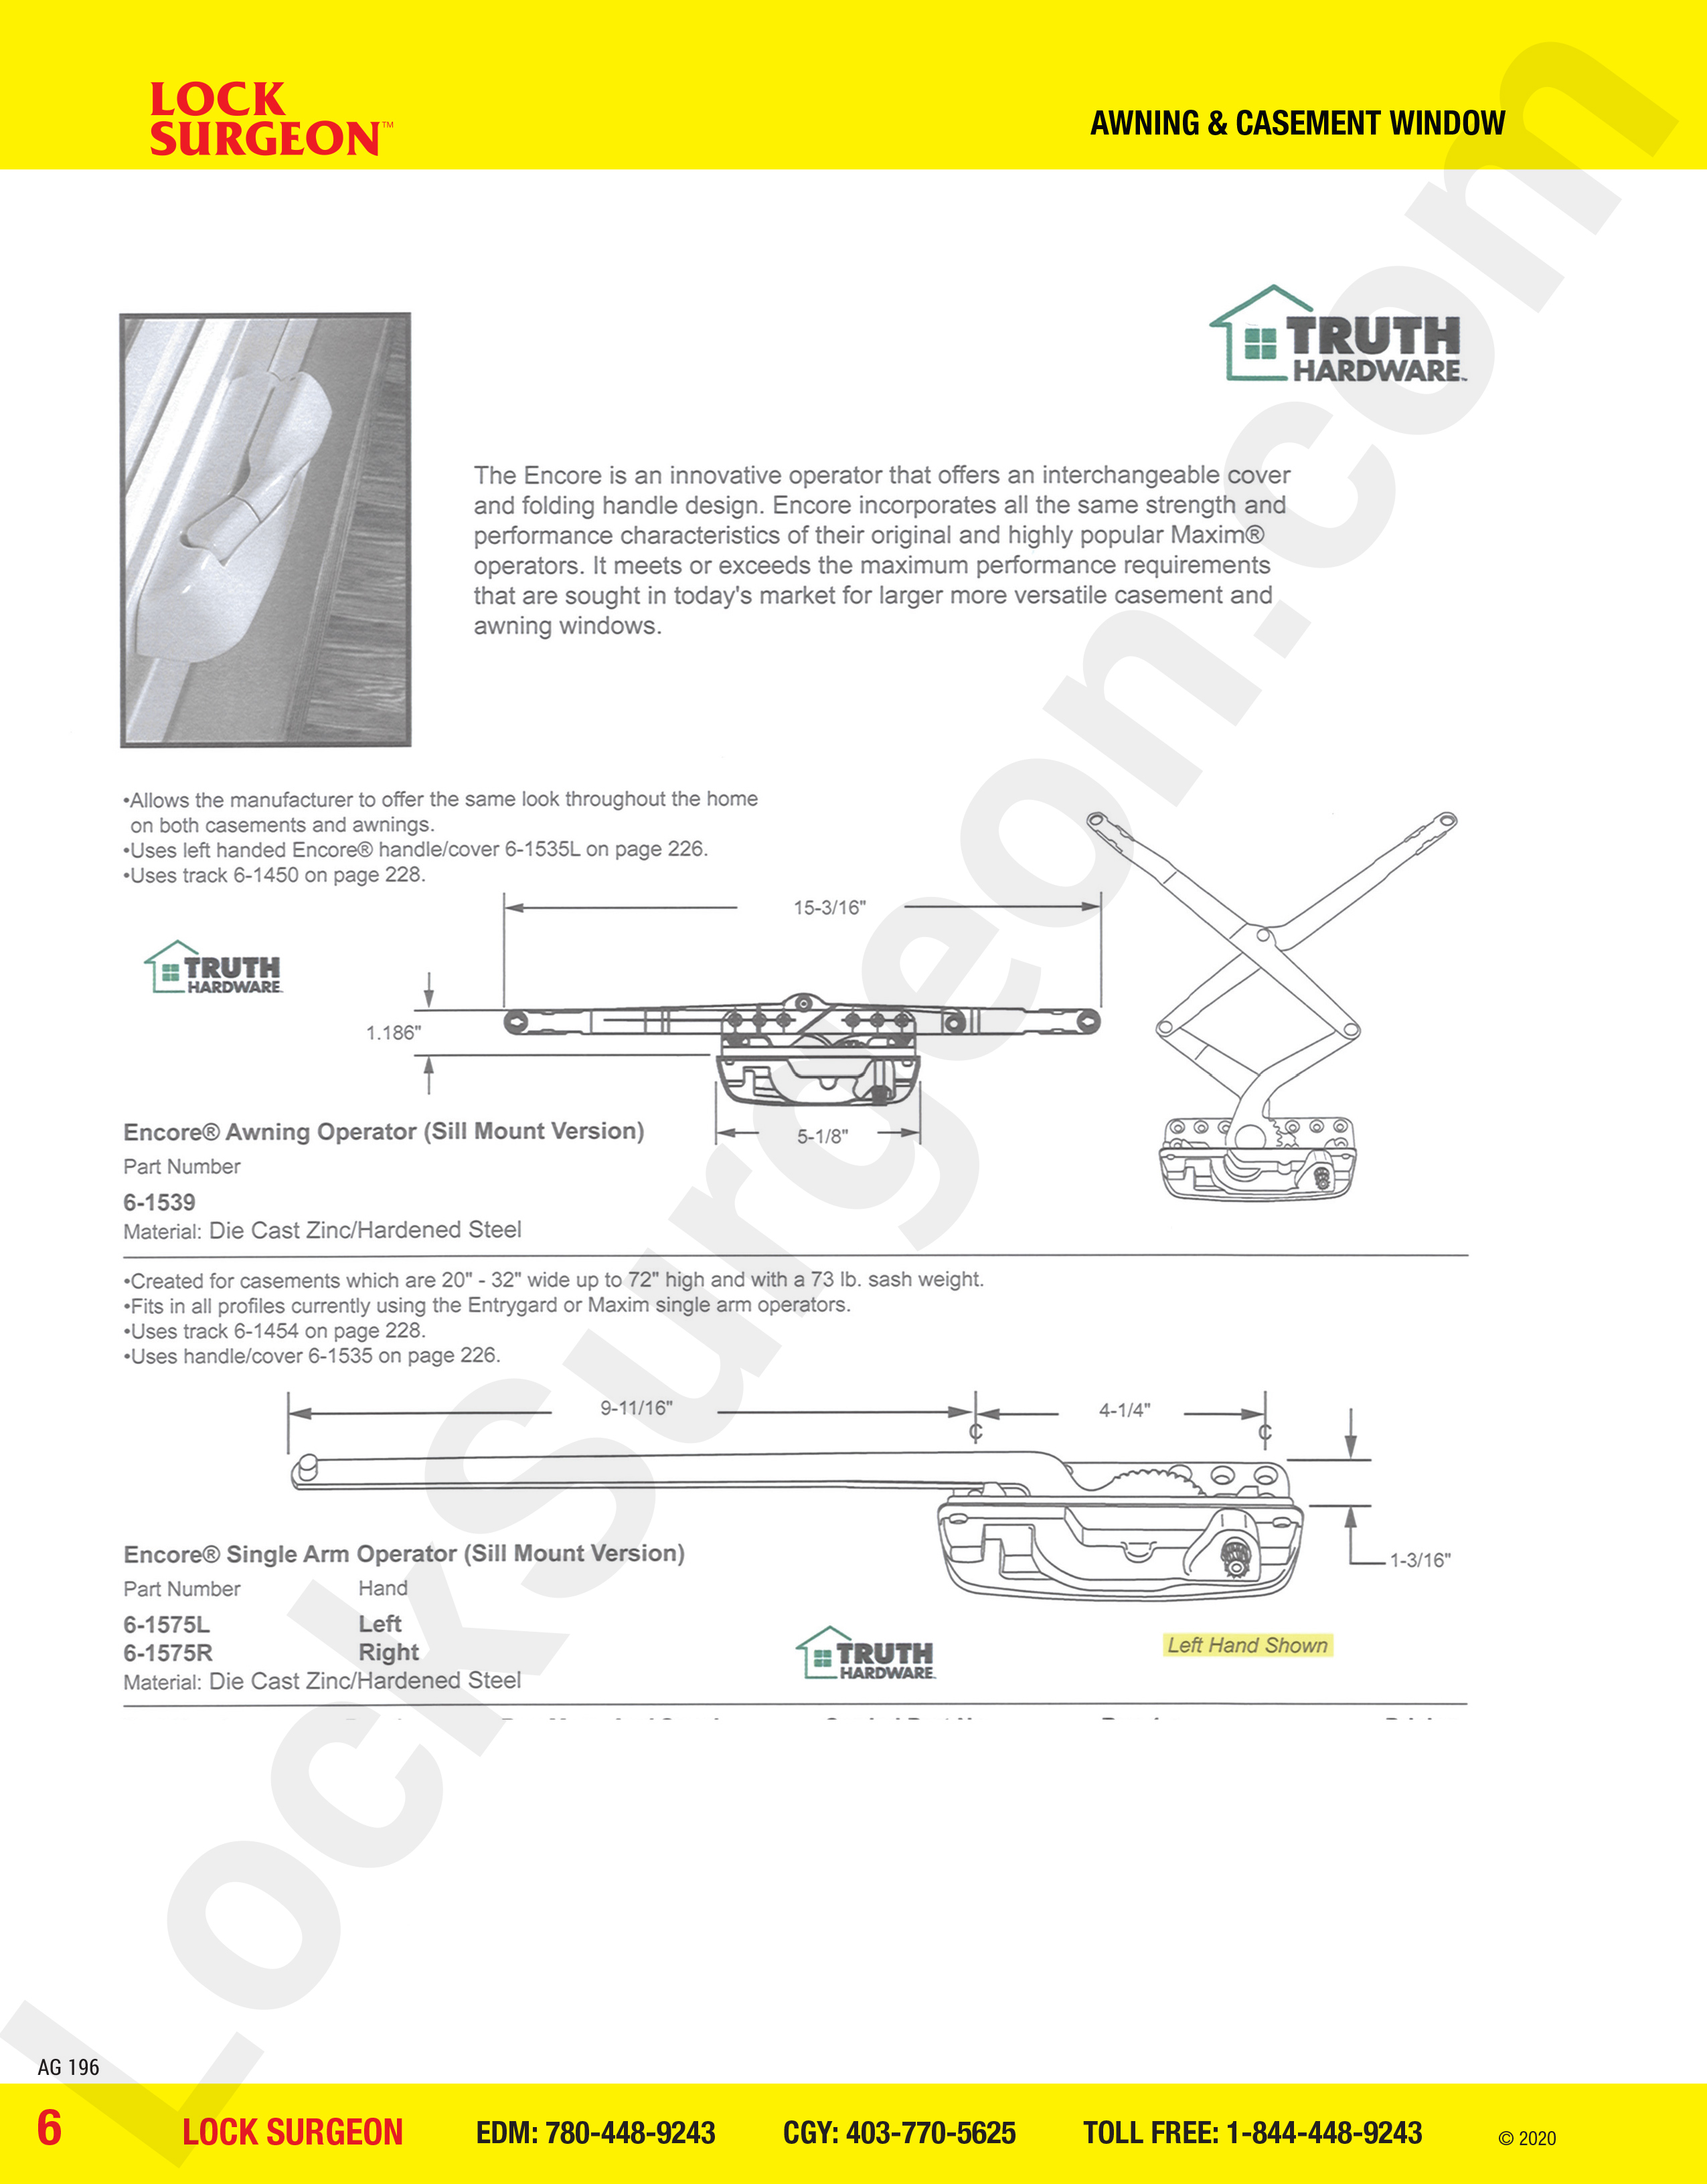 awning and casement window parts for encore operators, sill mount & single arm.